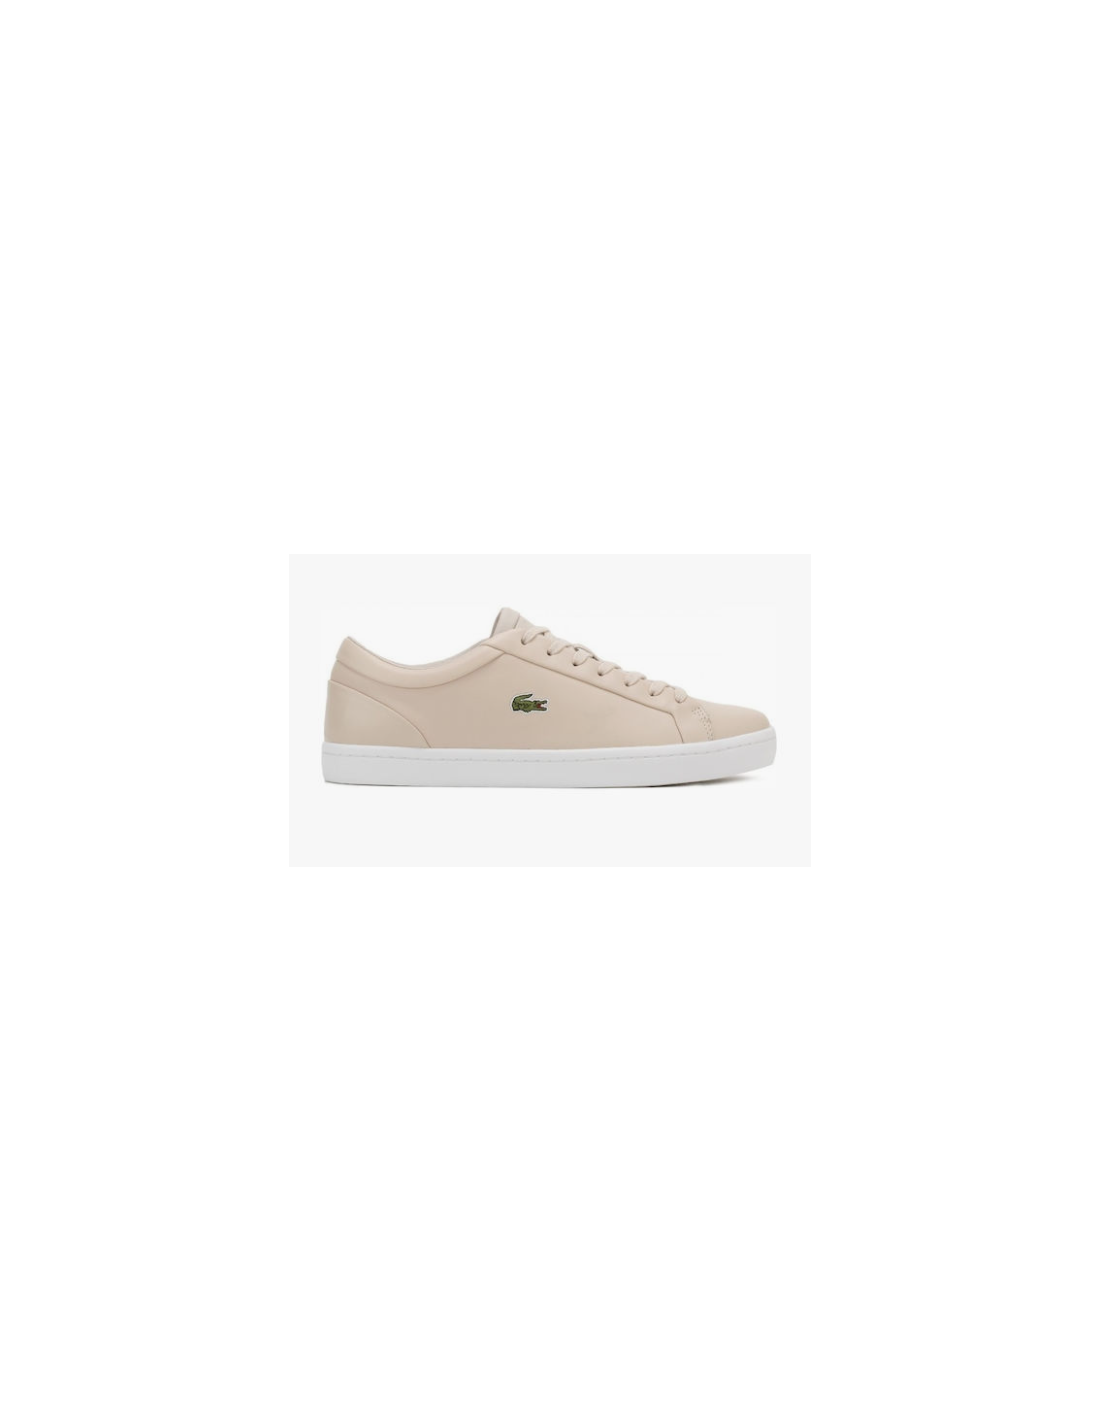 Dom Susteen Accepteret Lifestyle shoes Lacoste Straightset Lace 317 3 Caw W 7-34CAW006015J